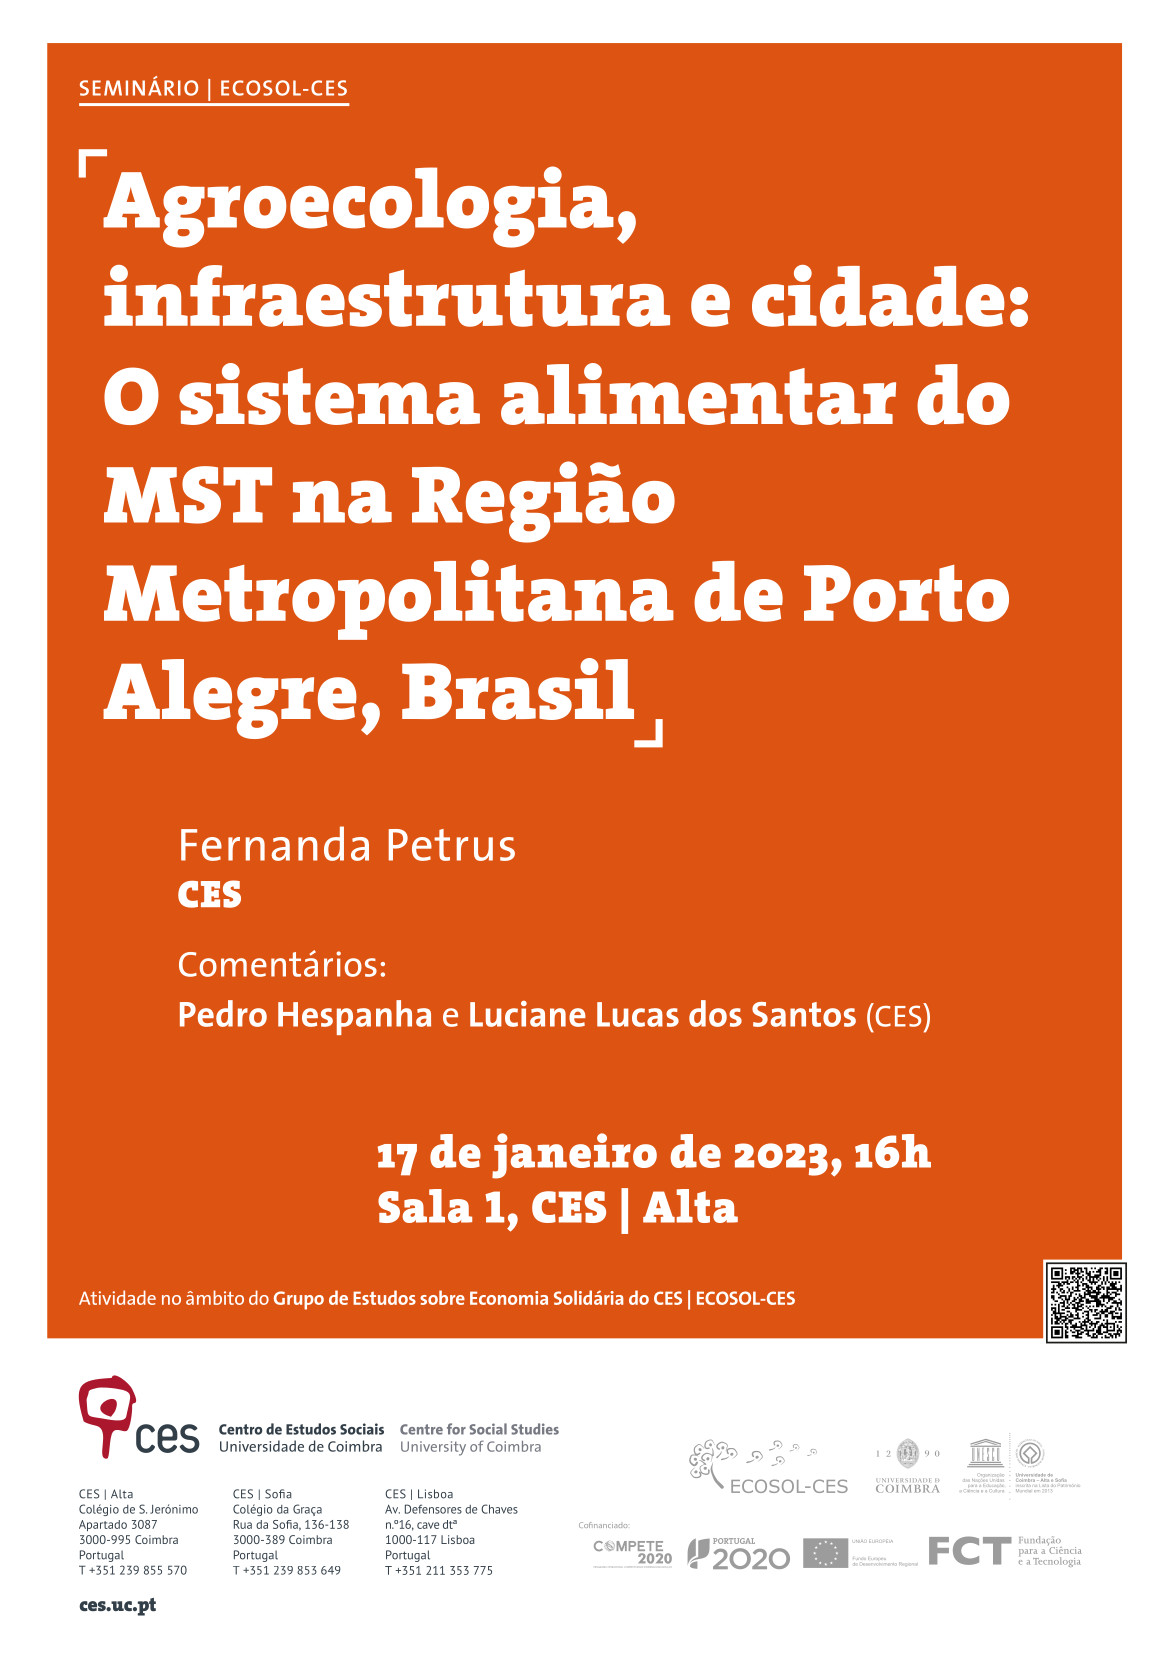 Agroecology, infrastructure and the city: MST's food system in the metropolitan region of Porto Alegre, Brazil<span id="edit_41520"><script>$(function() { $('#edit_41520').load( "/myces/user/editobj.php?tipo=evento&id=41520" ); });</script></span>